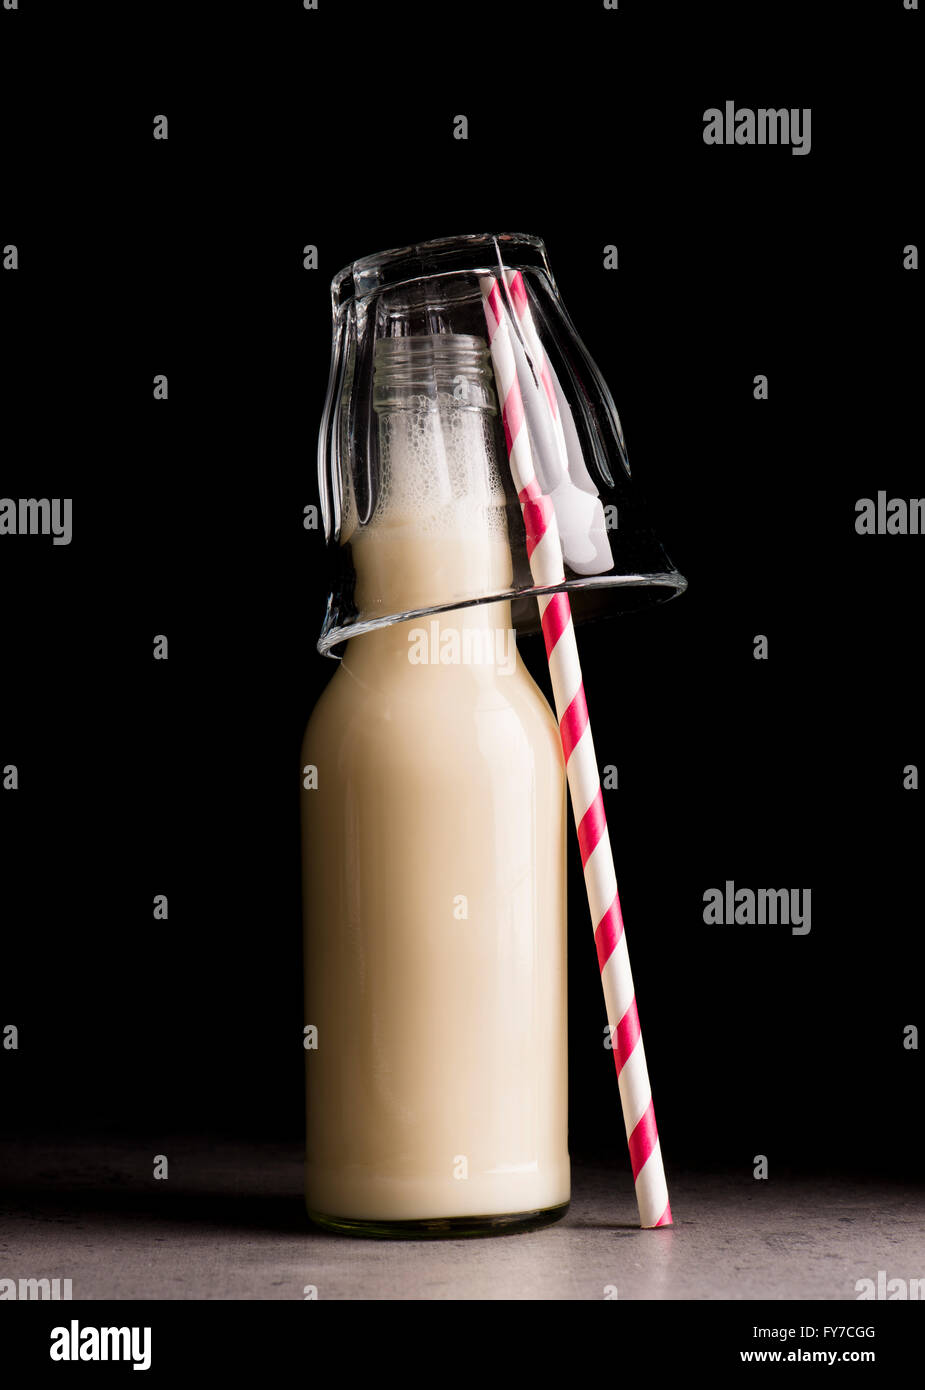 https://c8.alamy.com/comp/FY7CGG/soy-milk-in-glass-bottle-and-striped-drinking-straw-black-background-FY7CGG.jpg